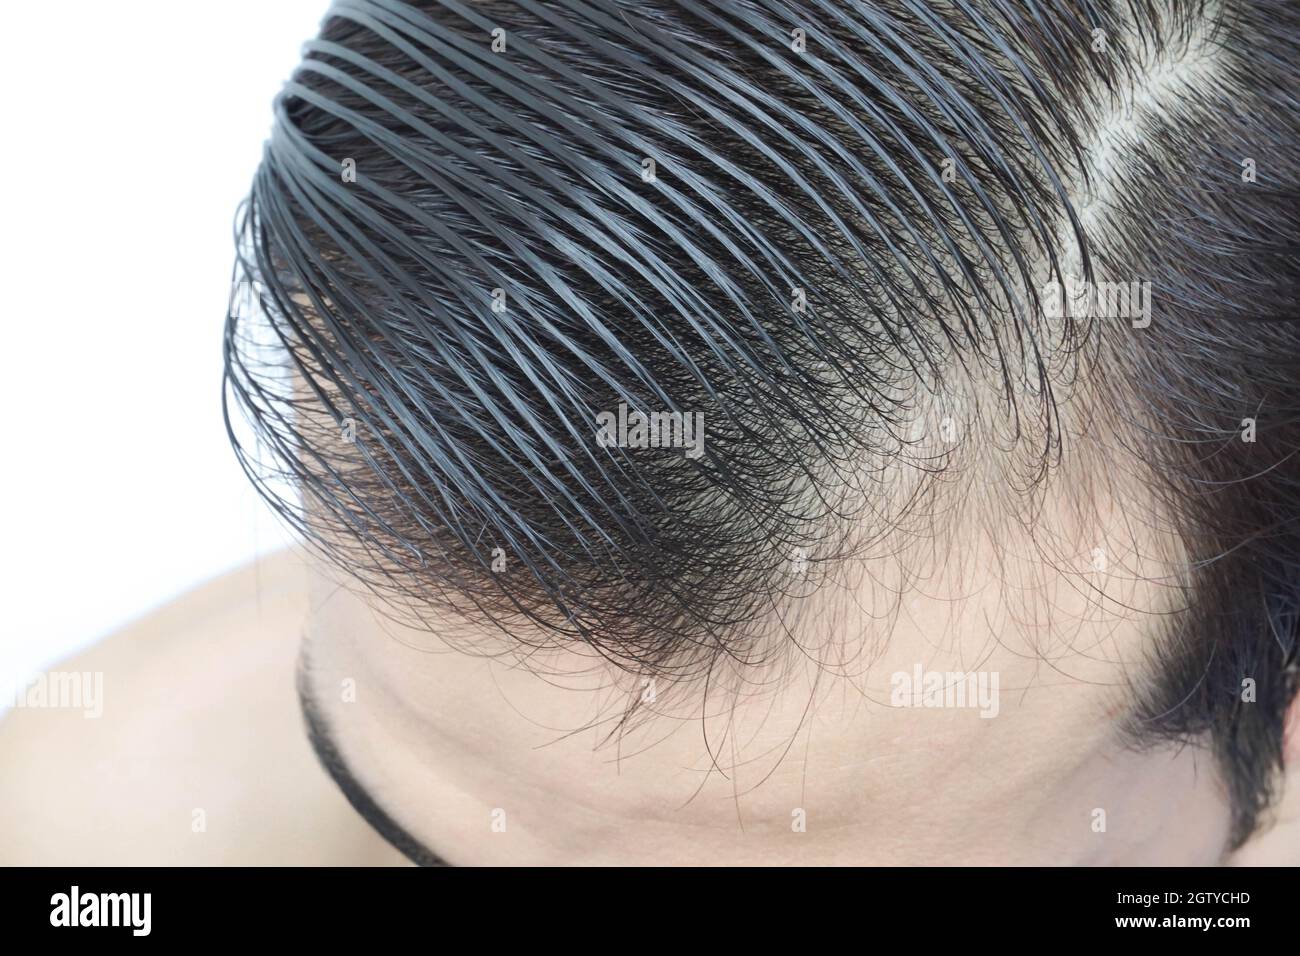 Close-up Of Man With Receding Hairline Against White Background Stock Photo